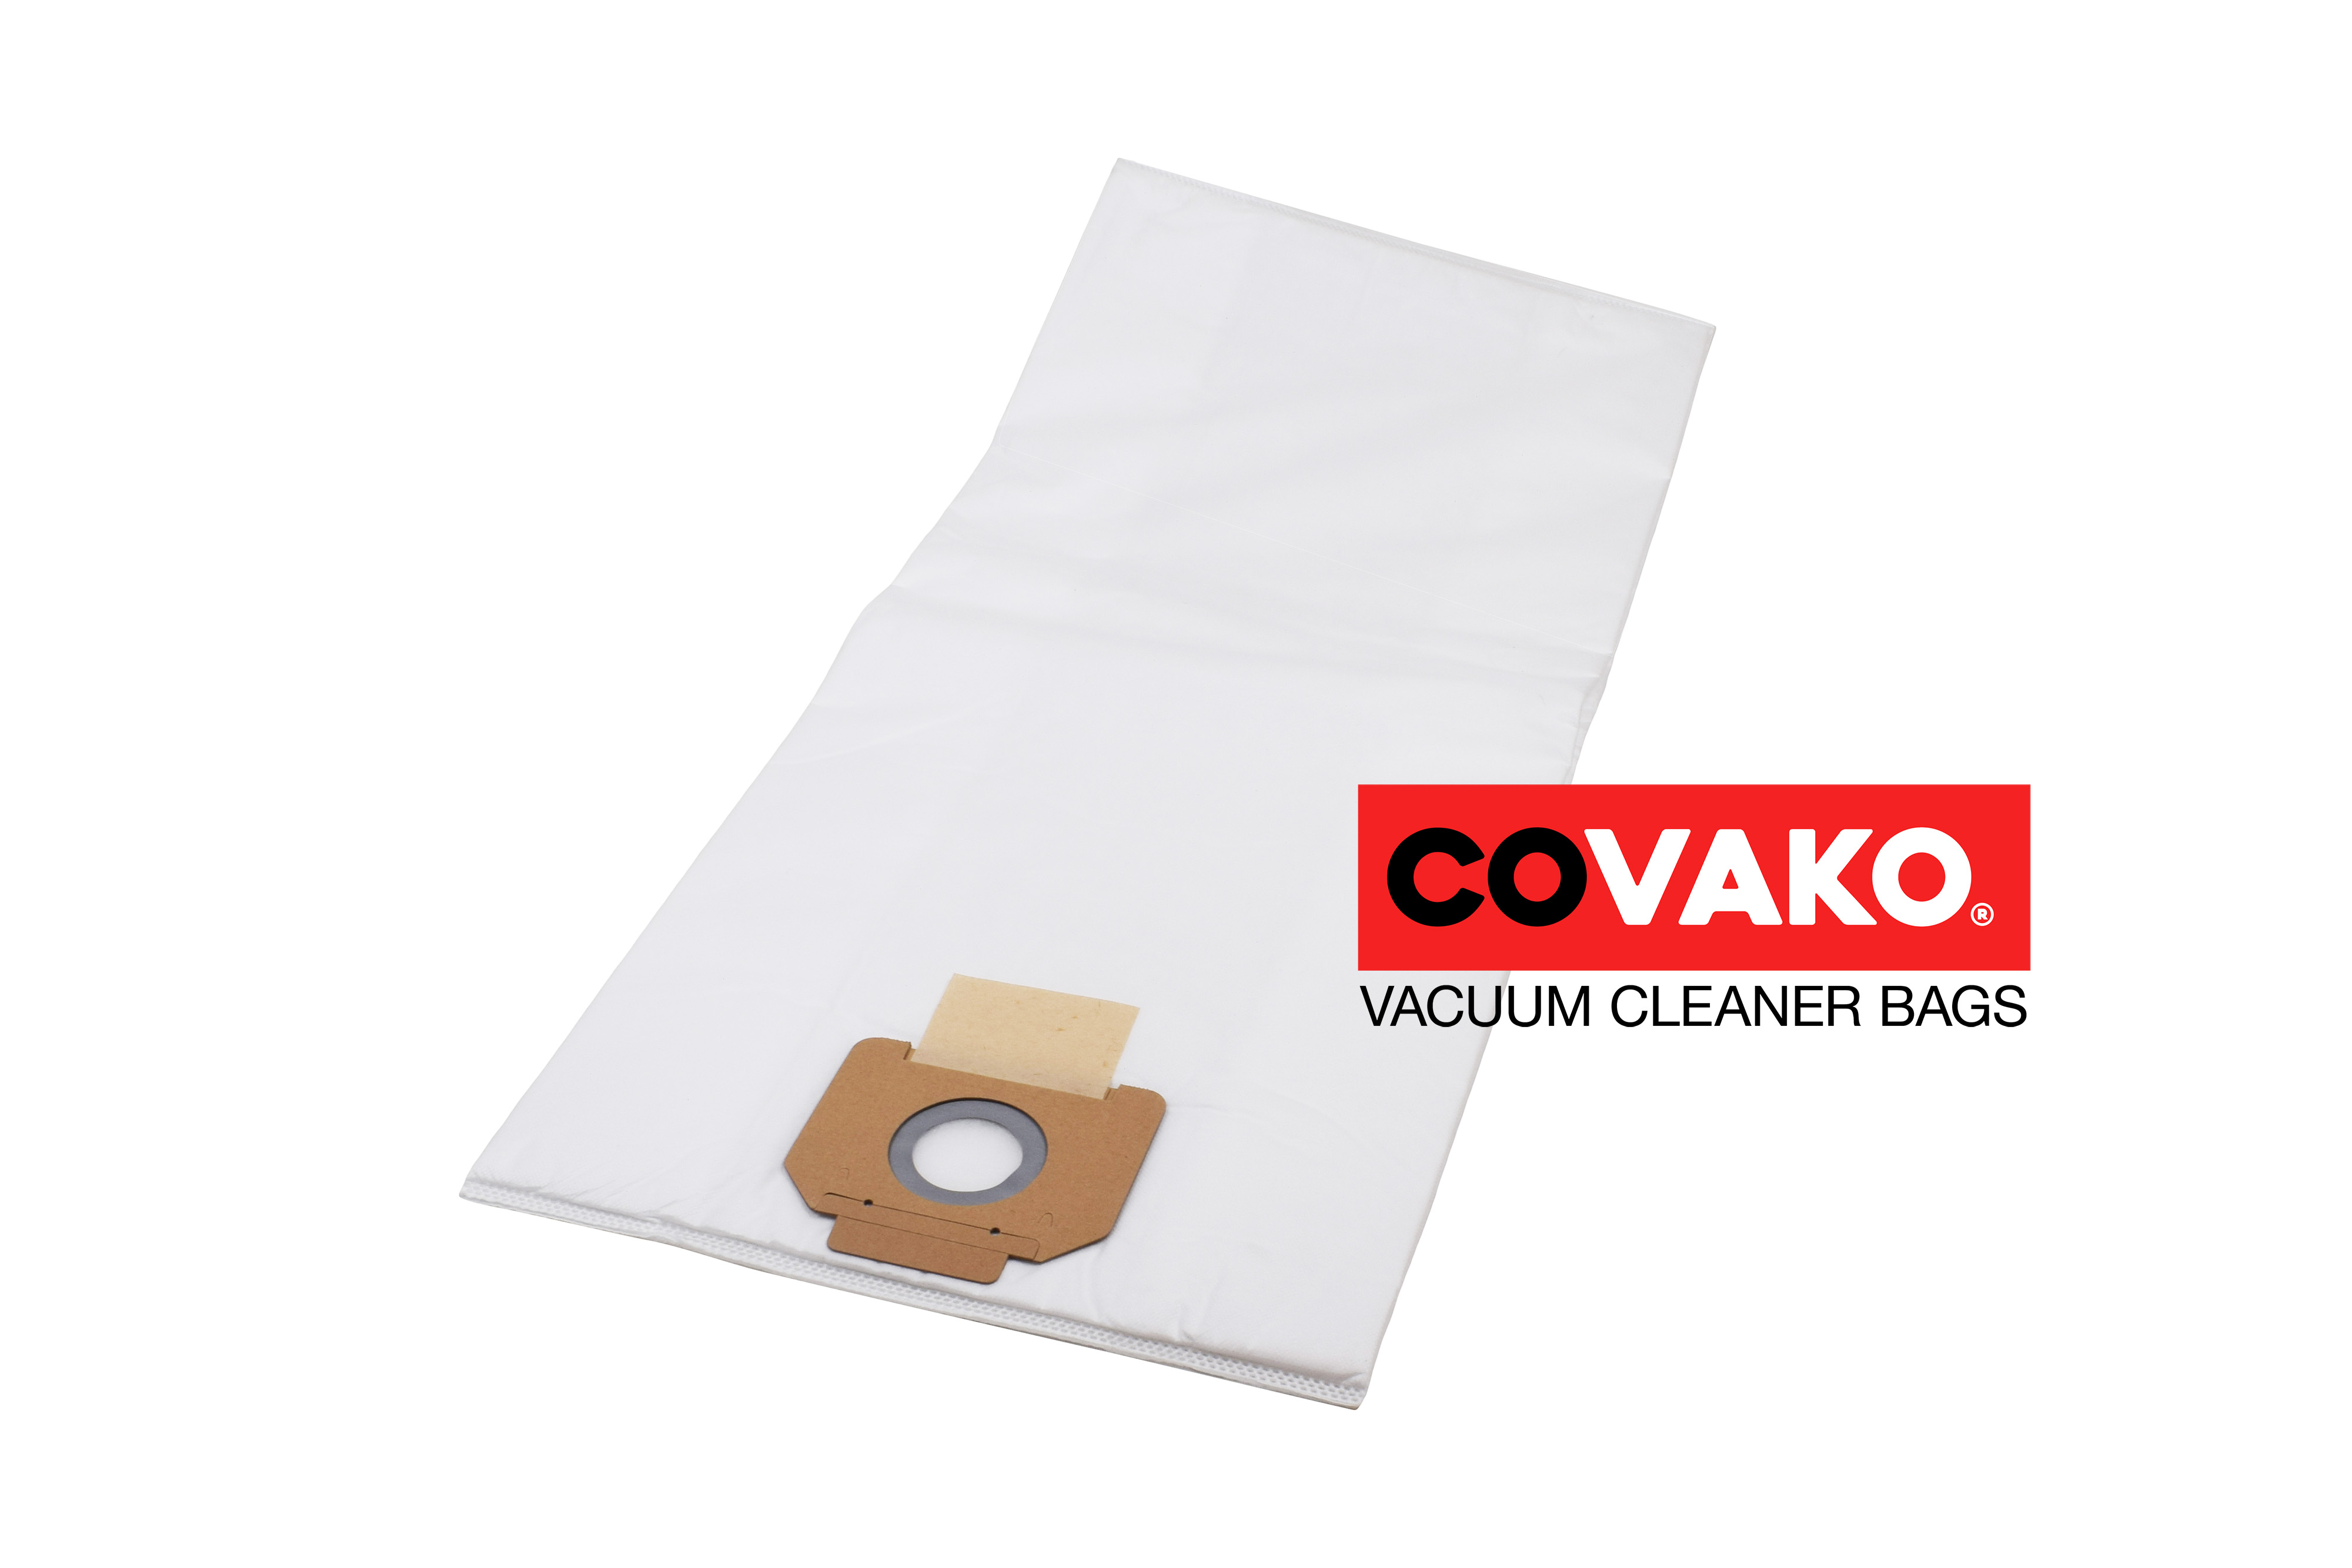 DiBo Windly Compact 440 B IPC / Synthesis - DiBo vacuum cleaner bags